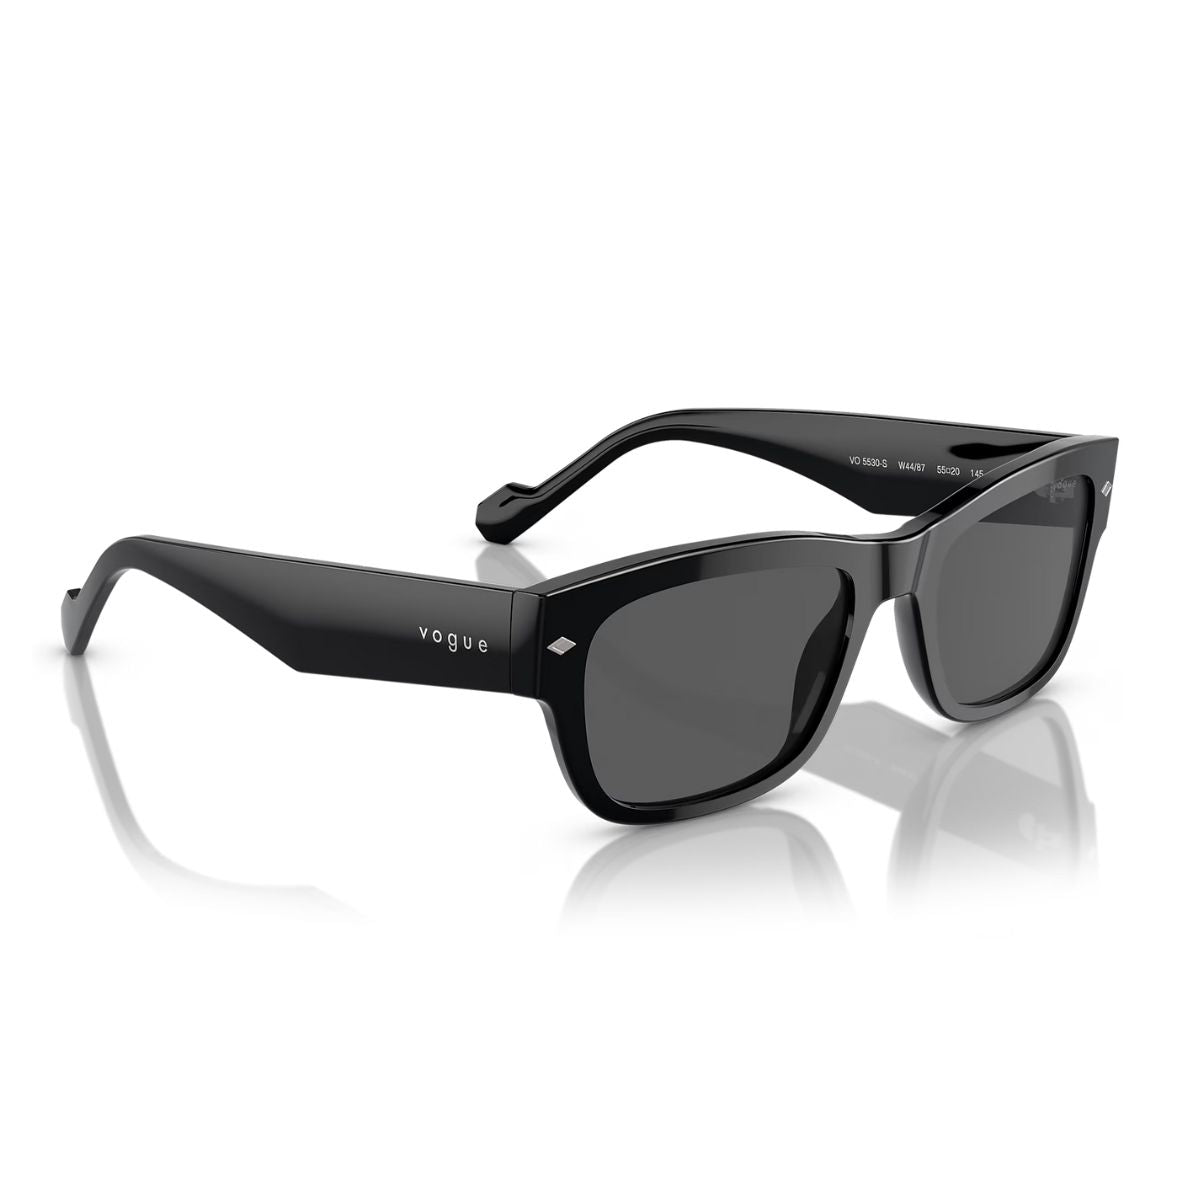 "Buy Stylish Vogue Rectangle Sunglasses For Women's At Online | Optorium"